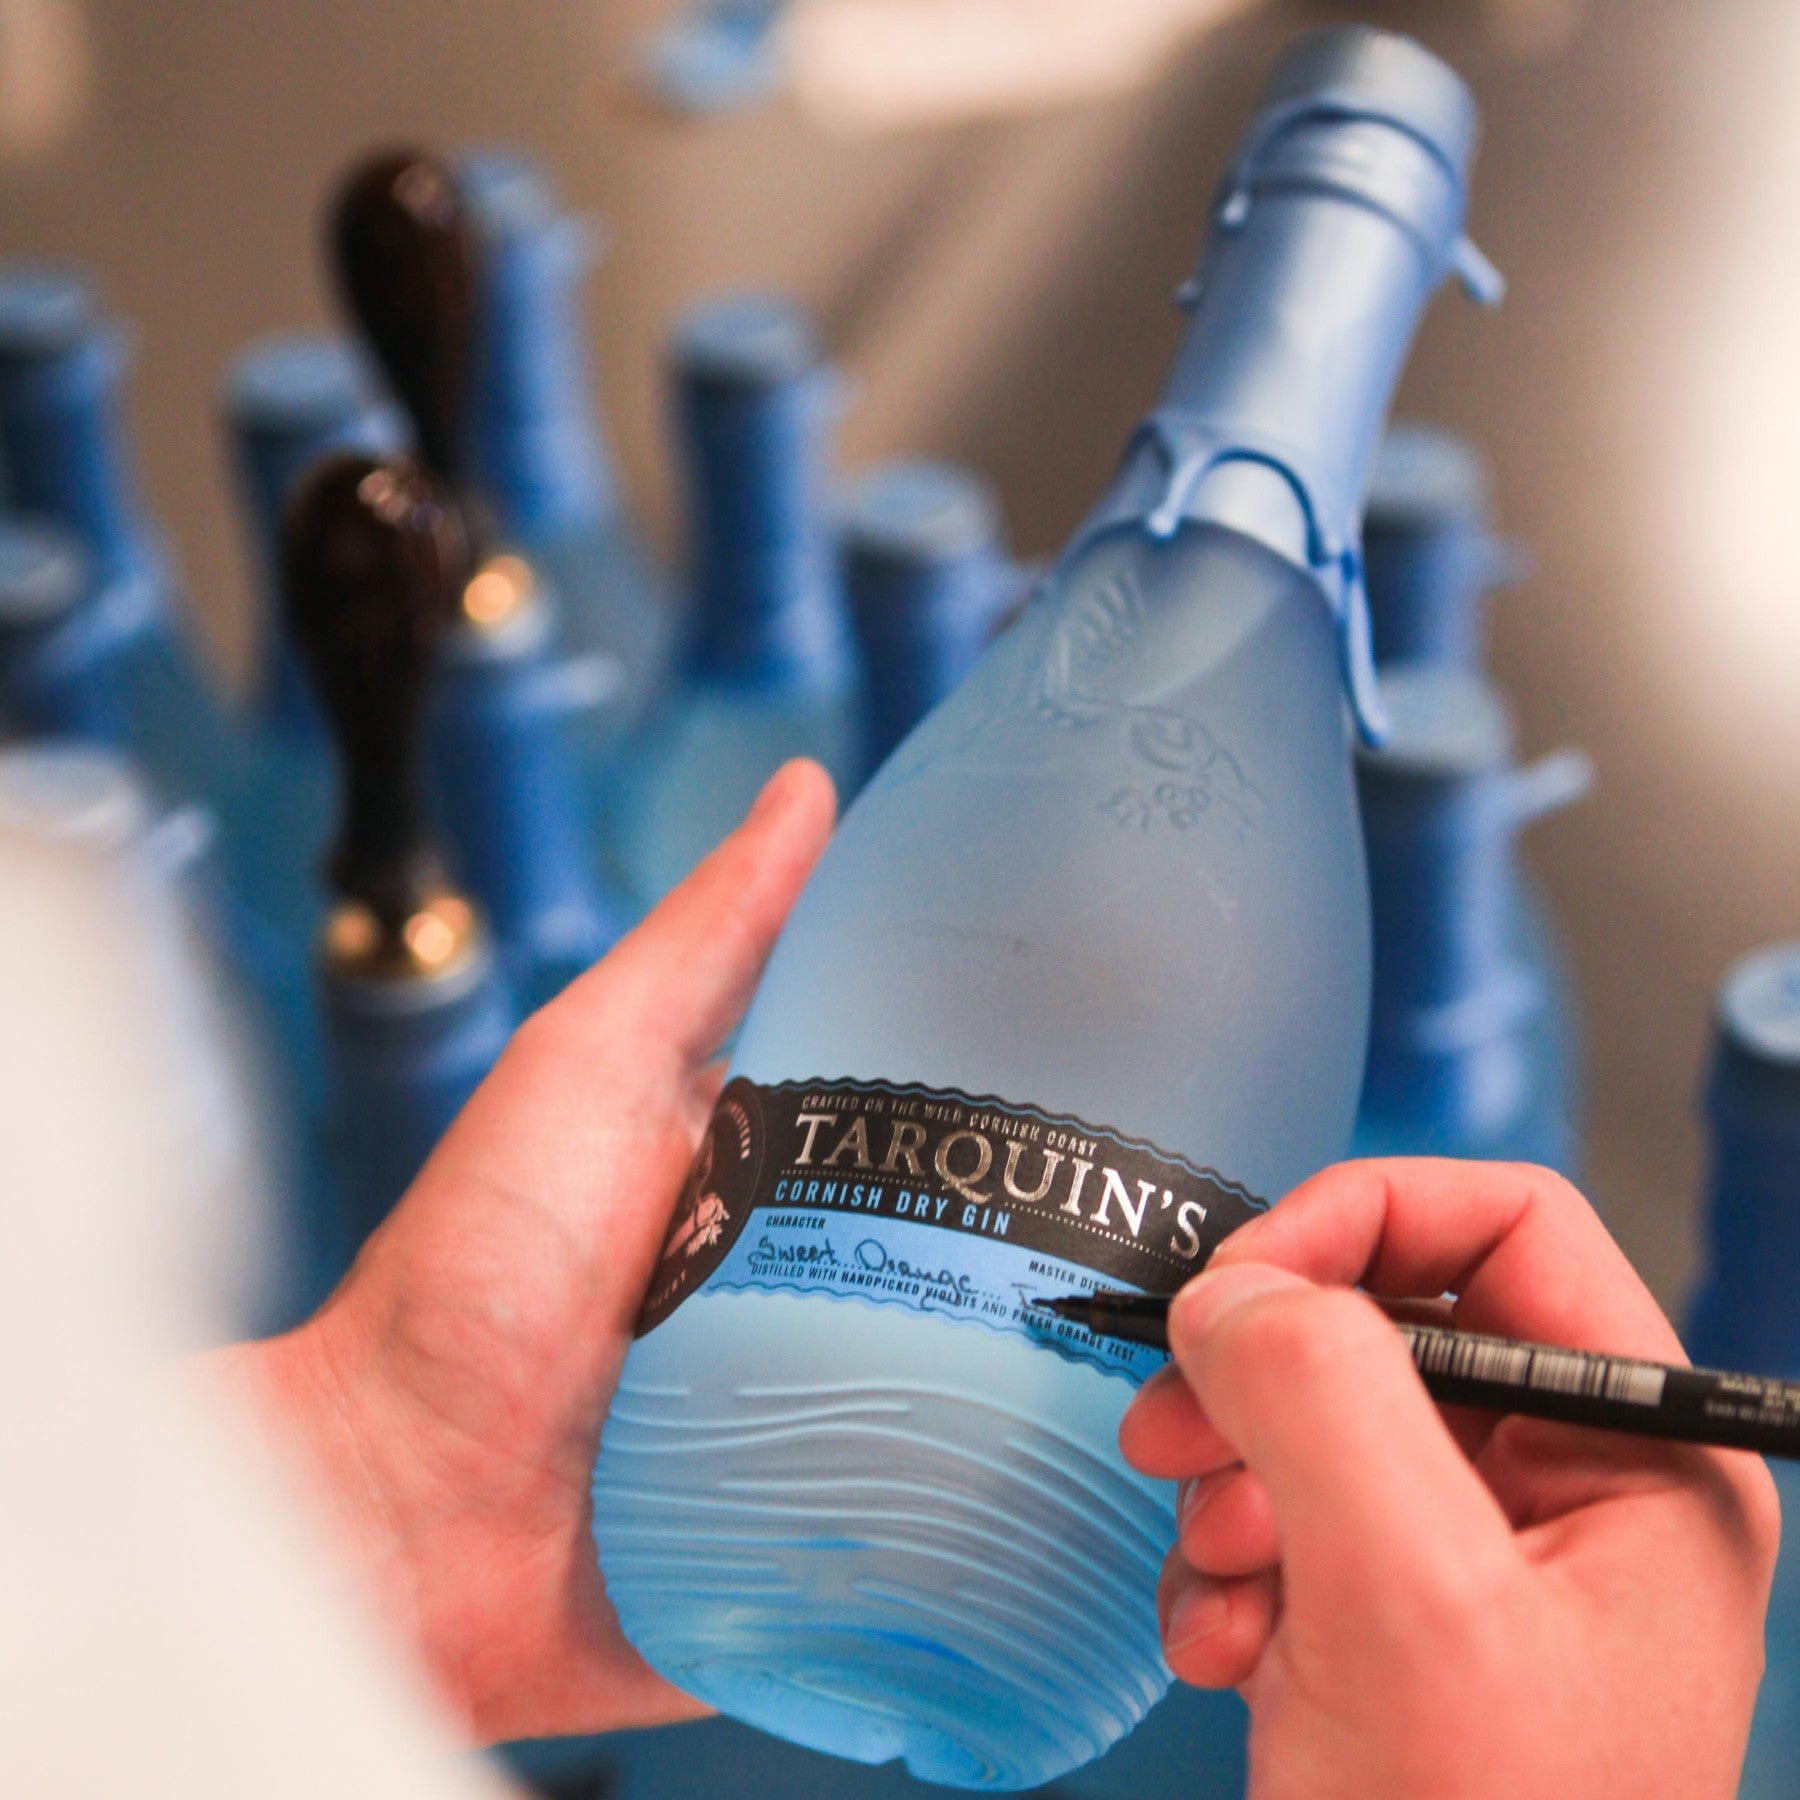 Hand applying label to Tarquin's Cornish Dry Gin bottle in factory with rows of blue bottles in background